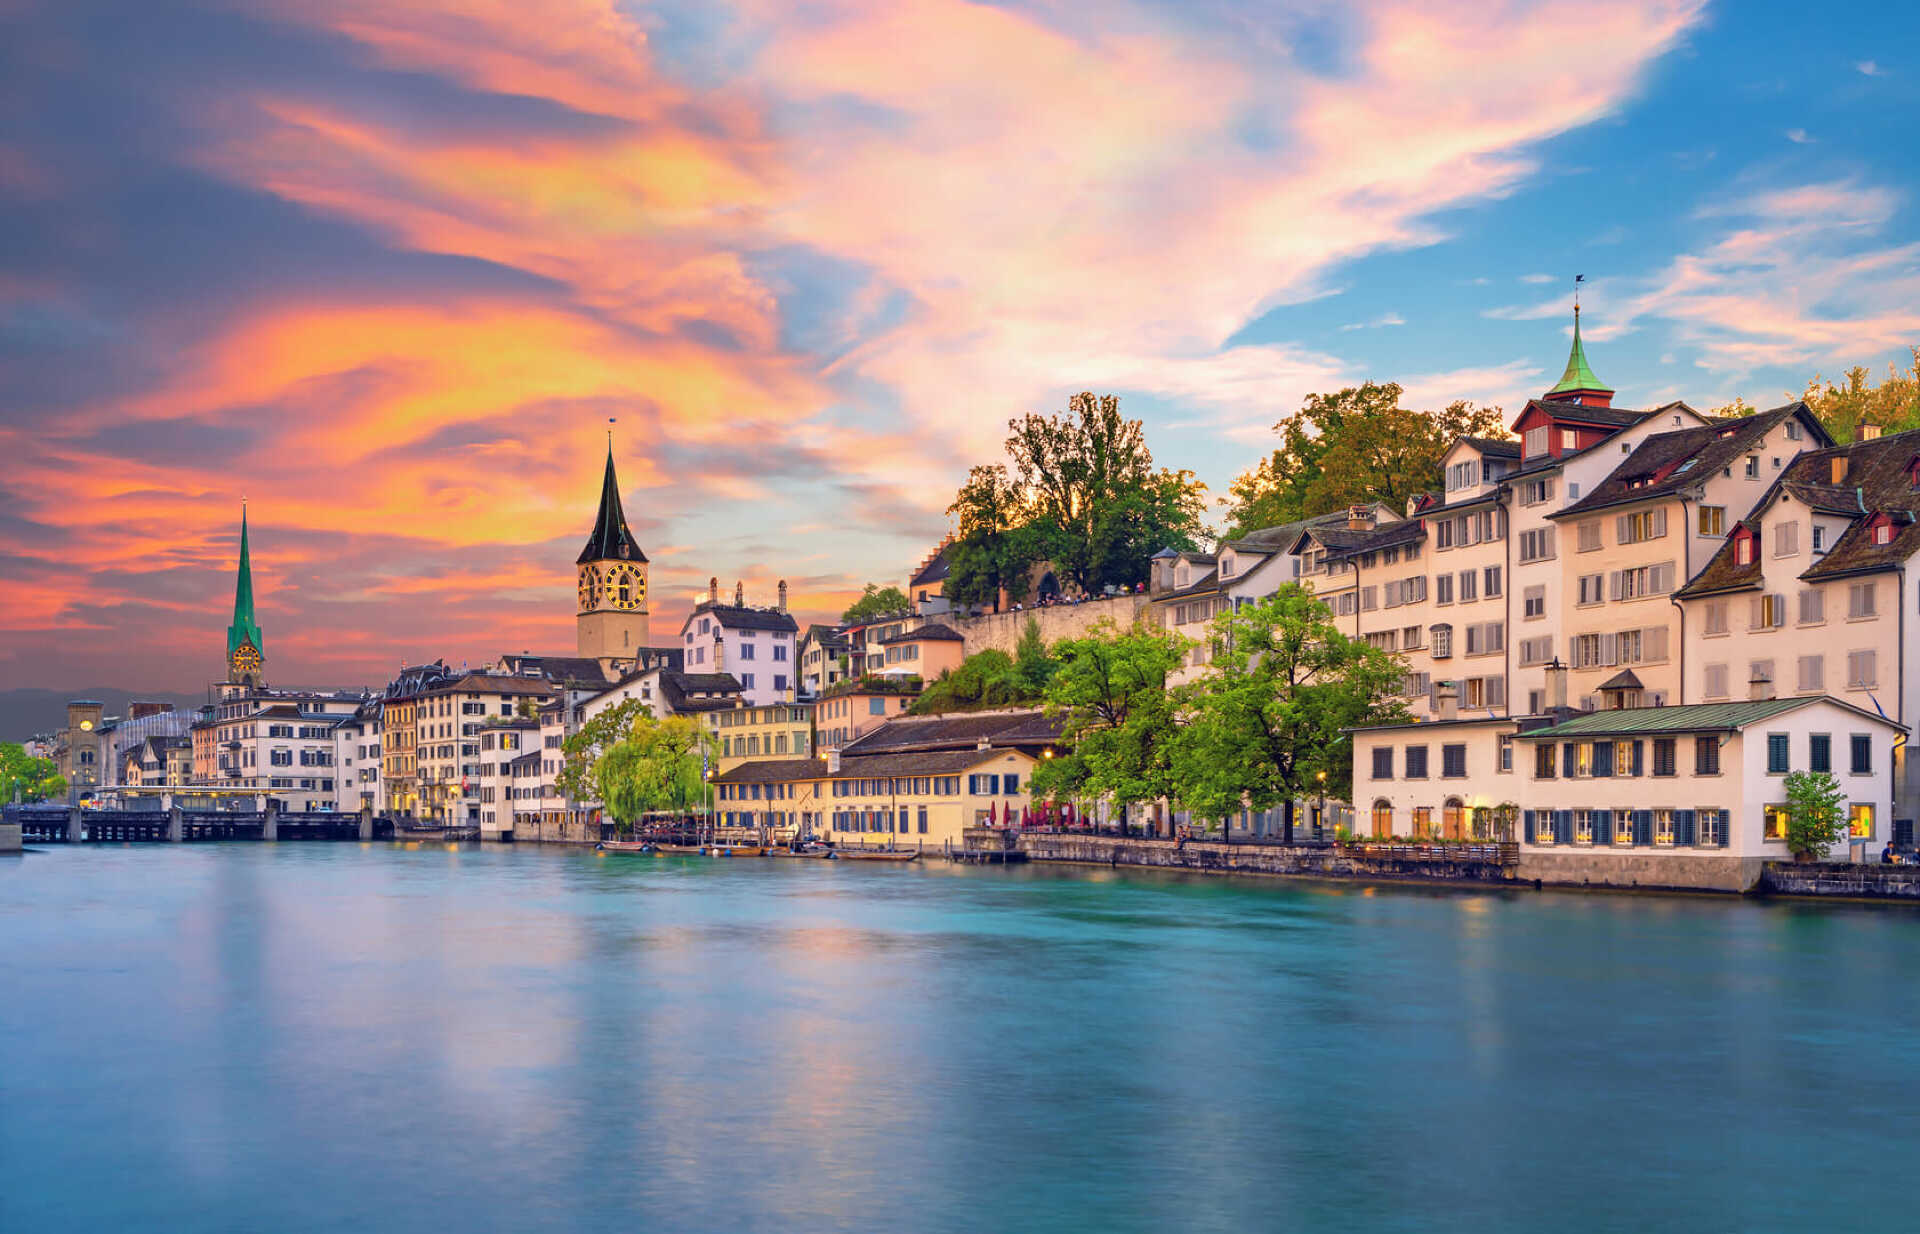 Scenic view of historic Zurich city center with famous Fraumunster and Grossmunster Churches and river Limmat at Lake Zurich, Canton of Zurich, Switzerland